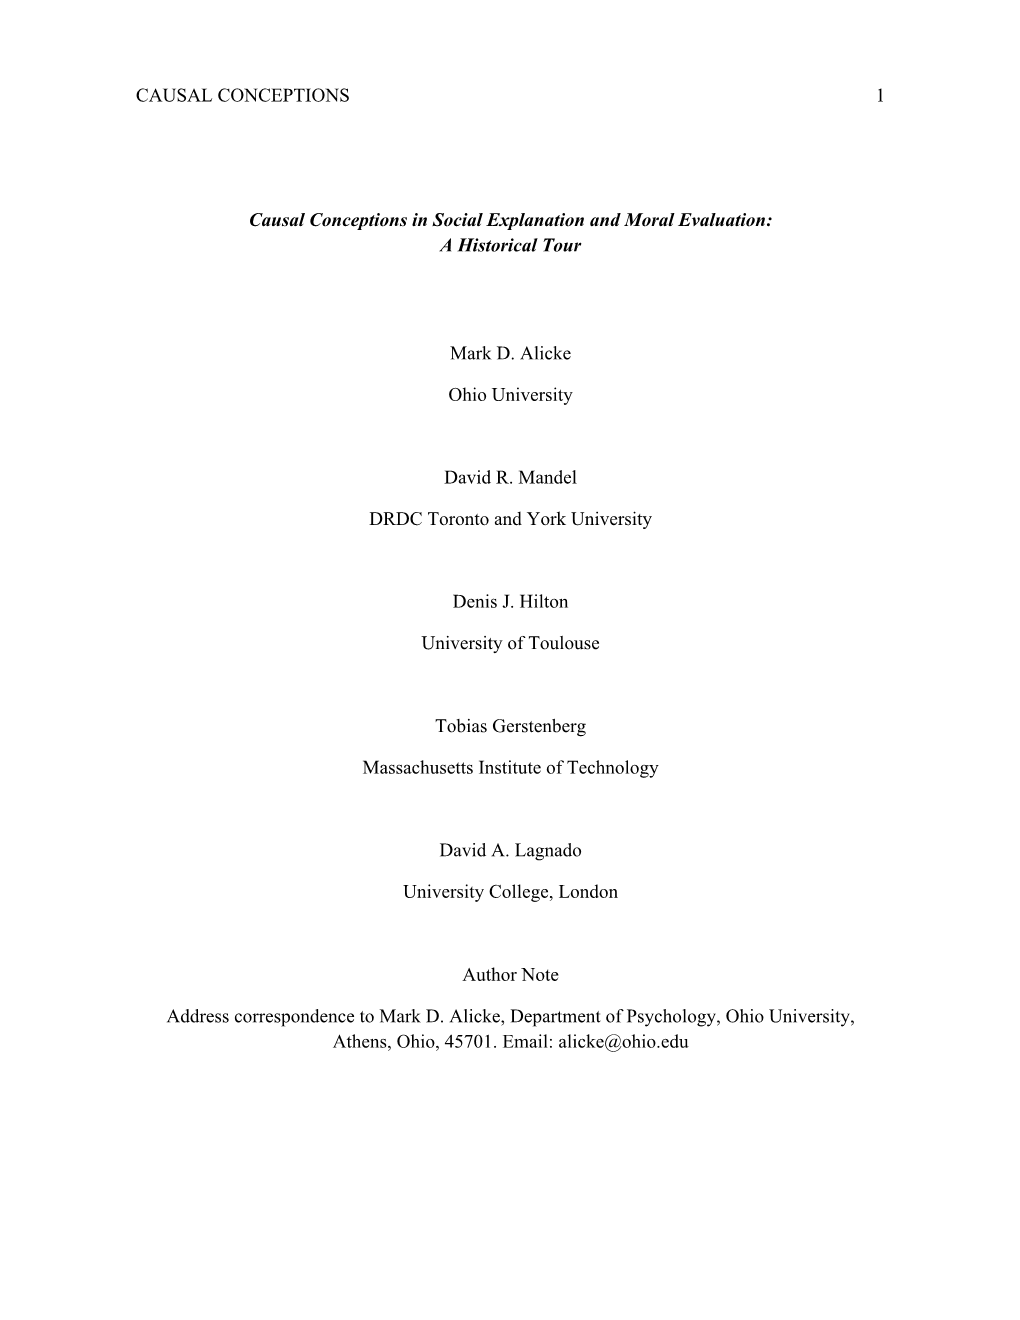 Causal Conceptions in Social Explanation and Moral Evaluation: a Historical Tour